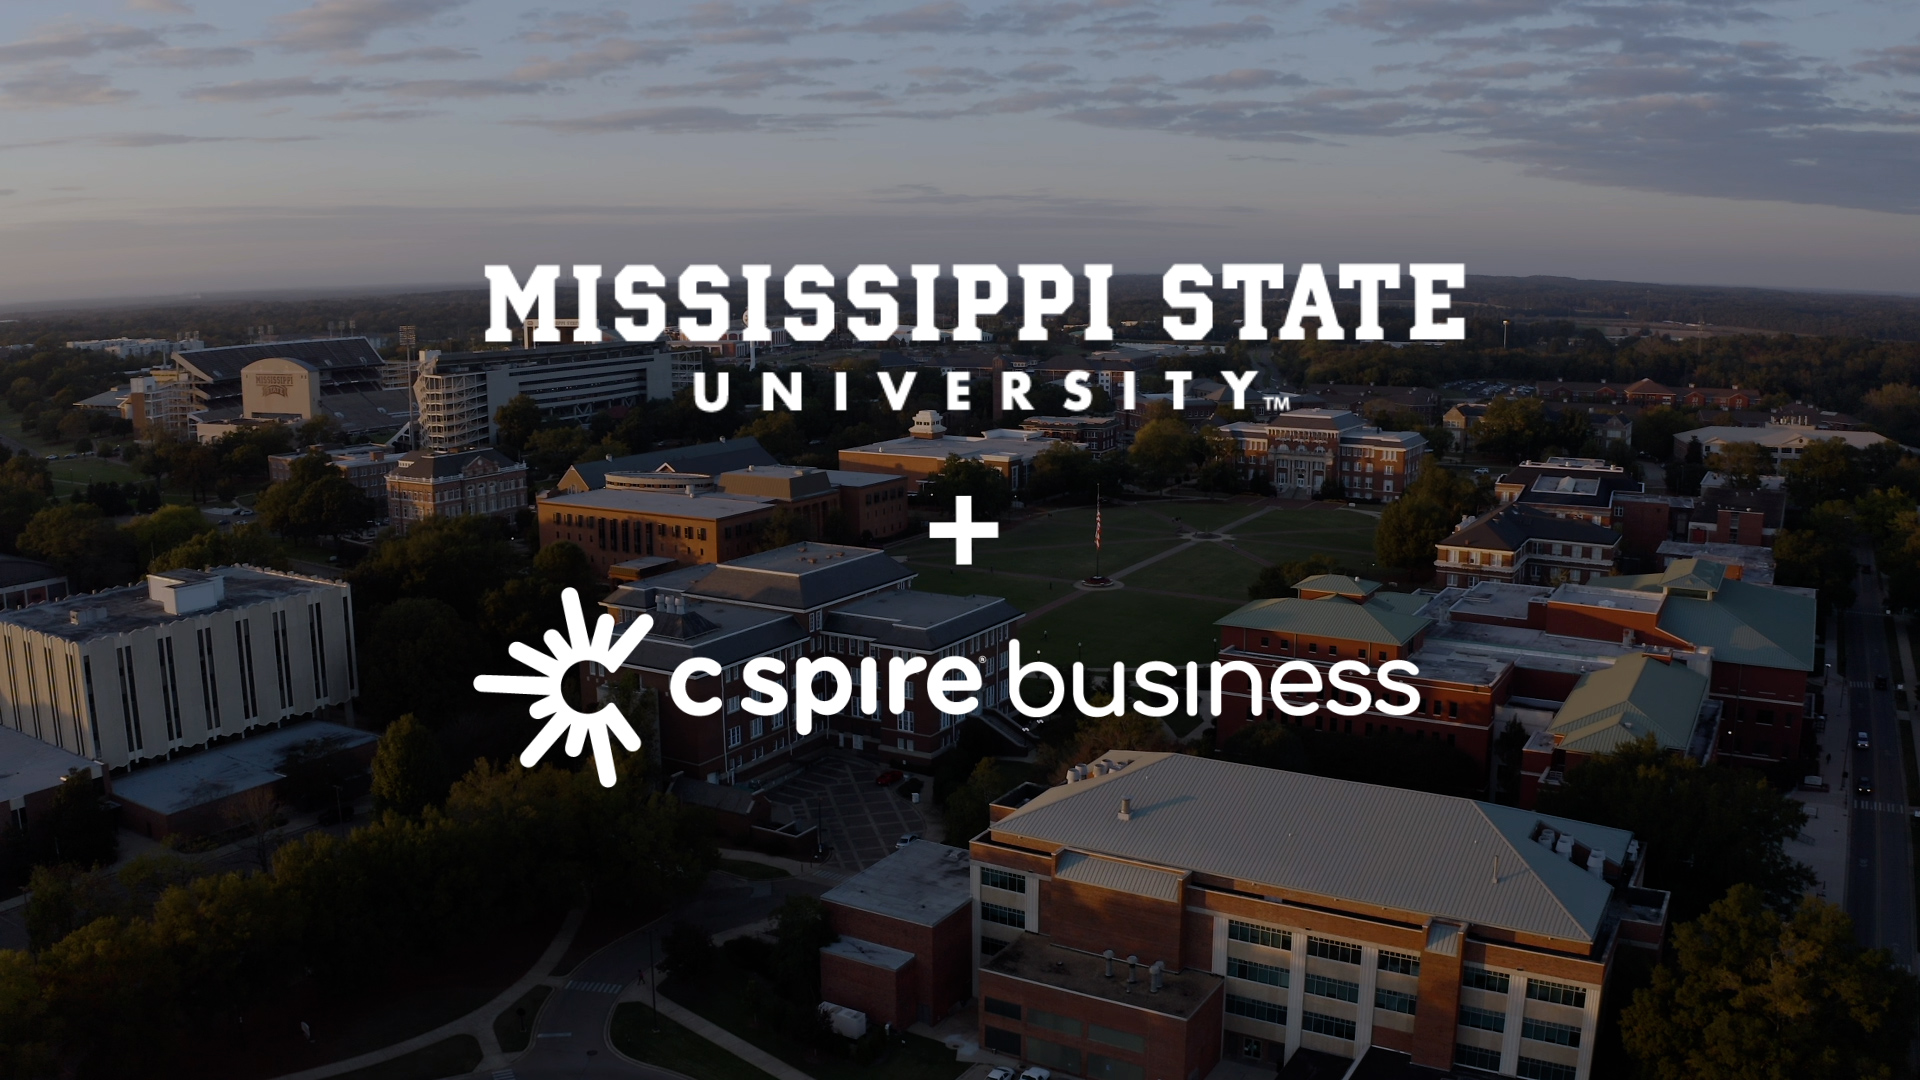 Mississippi State University and C Spire Business